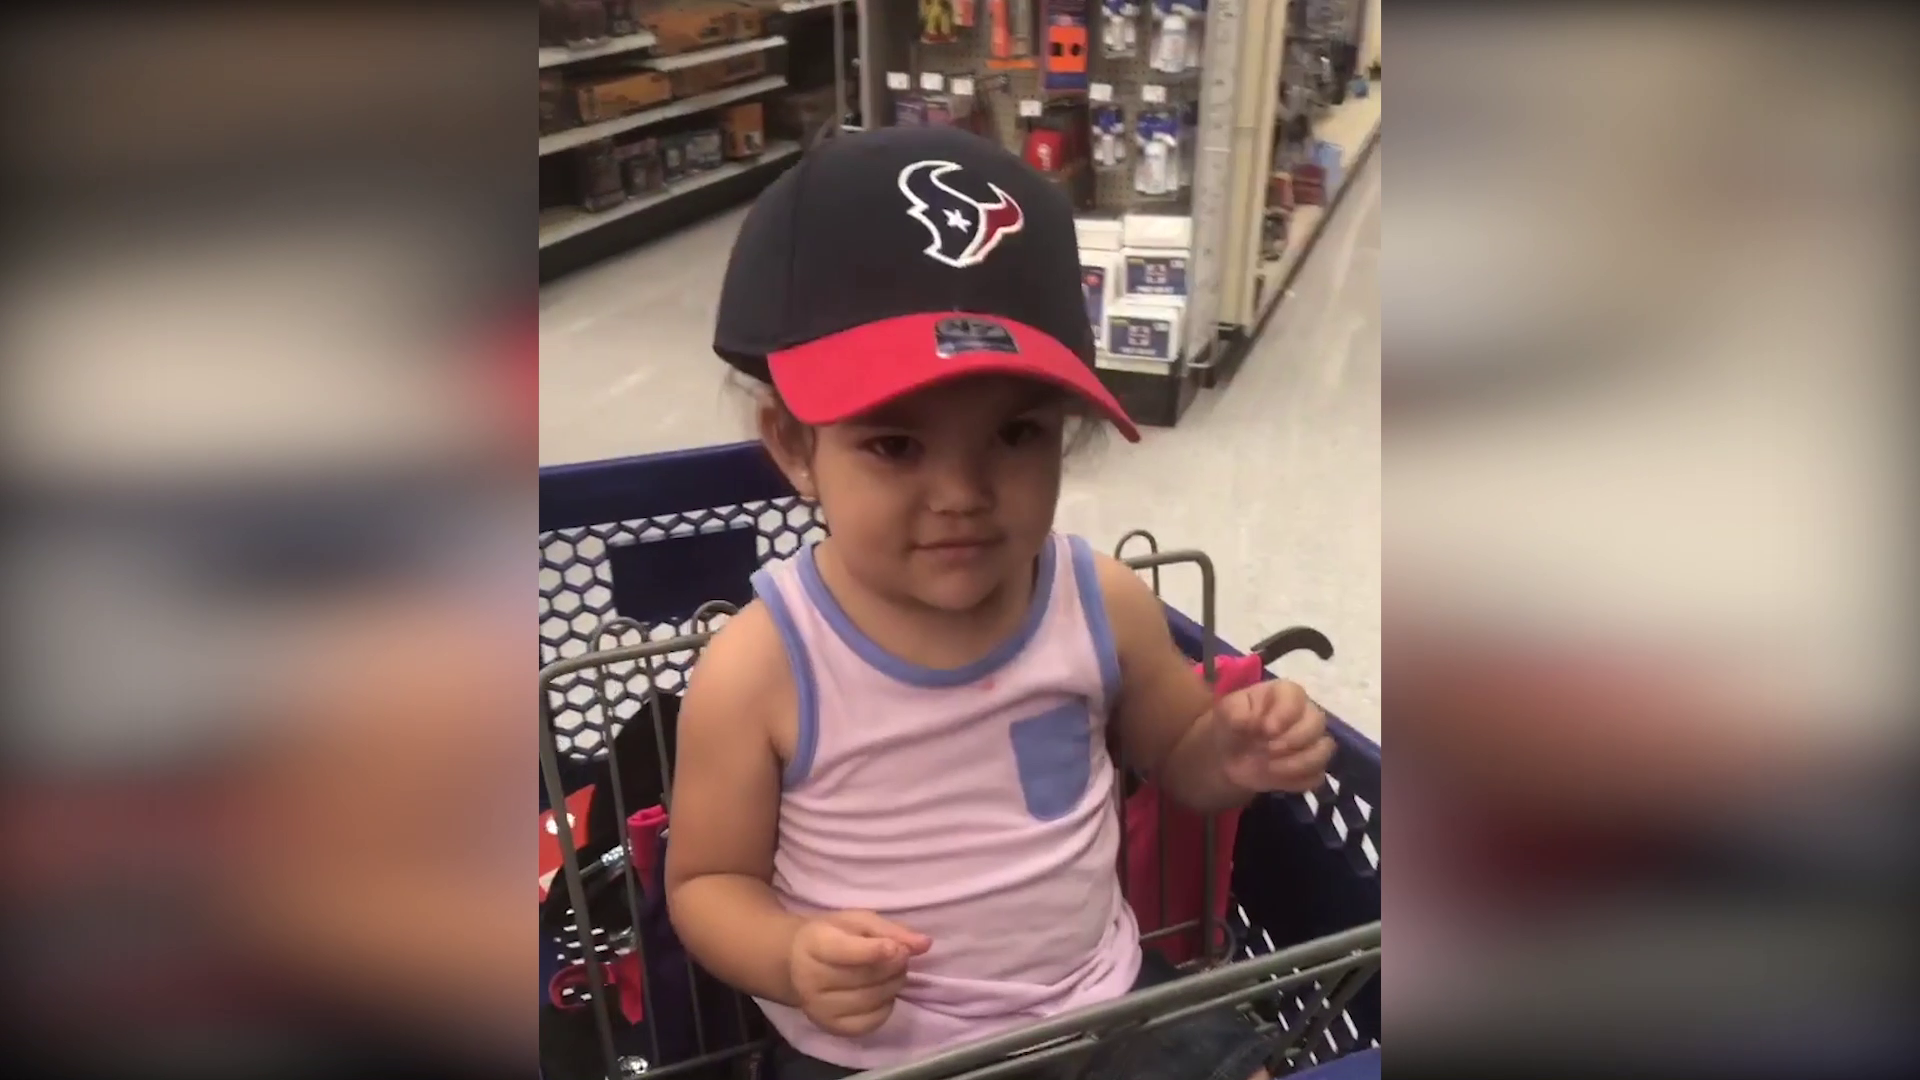 Instilling sports fandom starts at a young age, and Houston Texans fan Olivia Mendoza is proof.